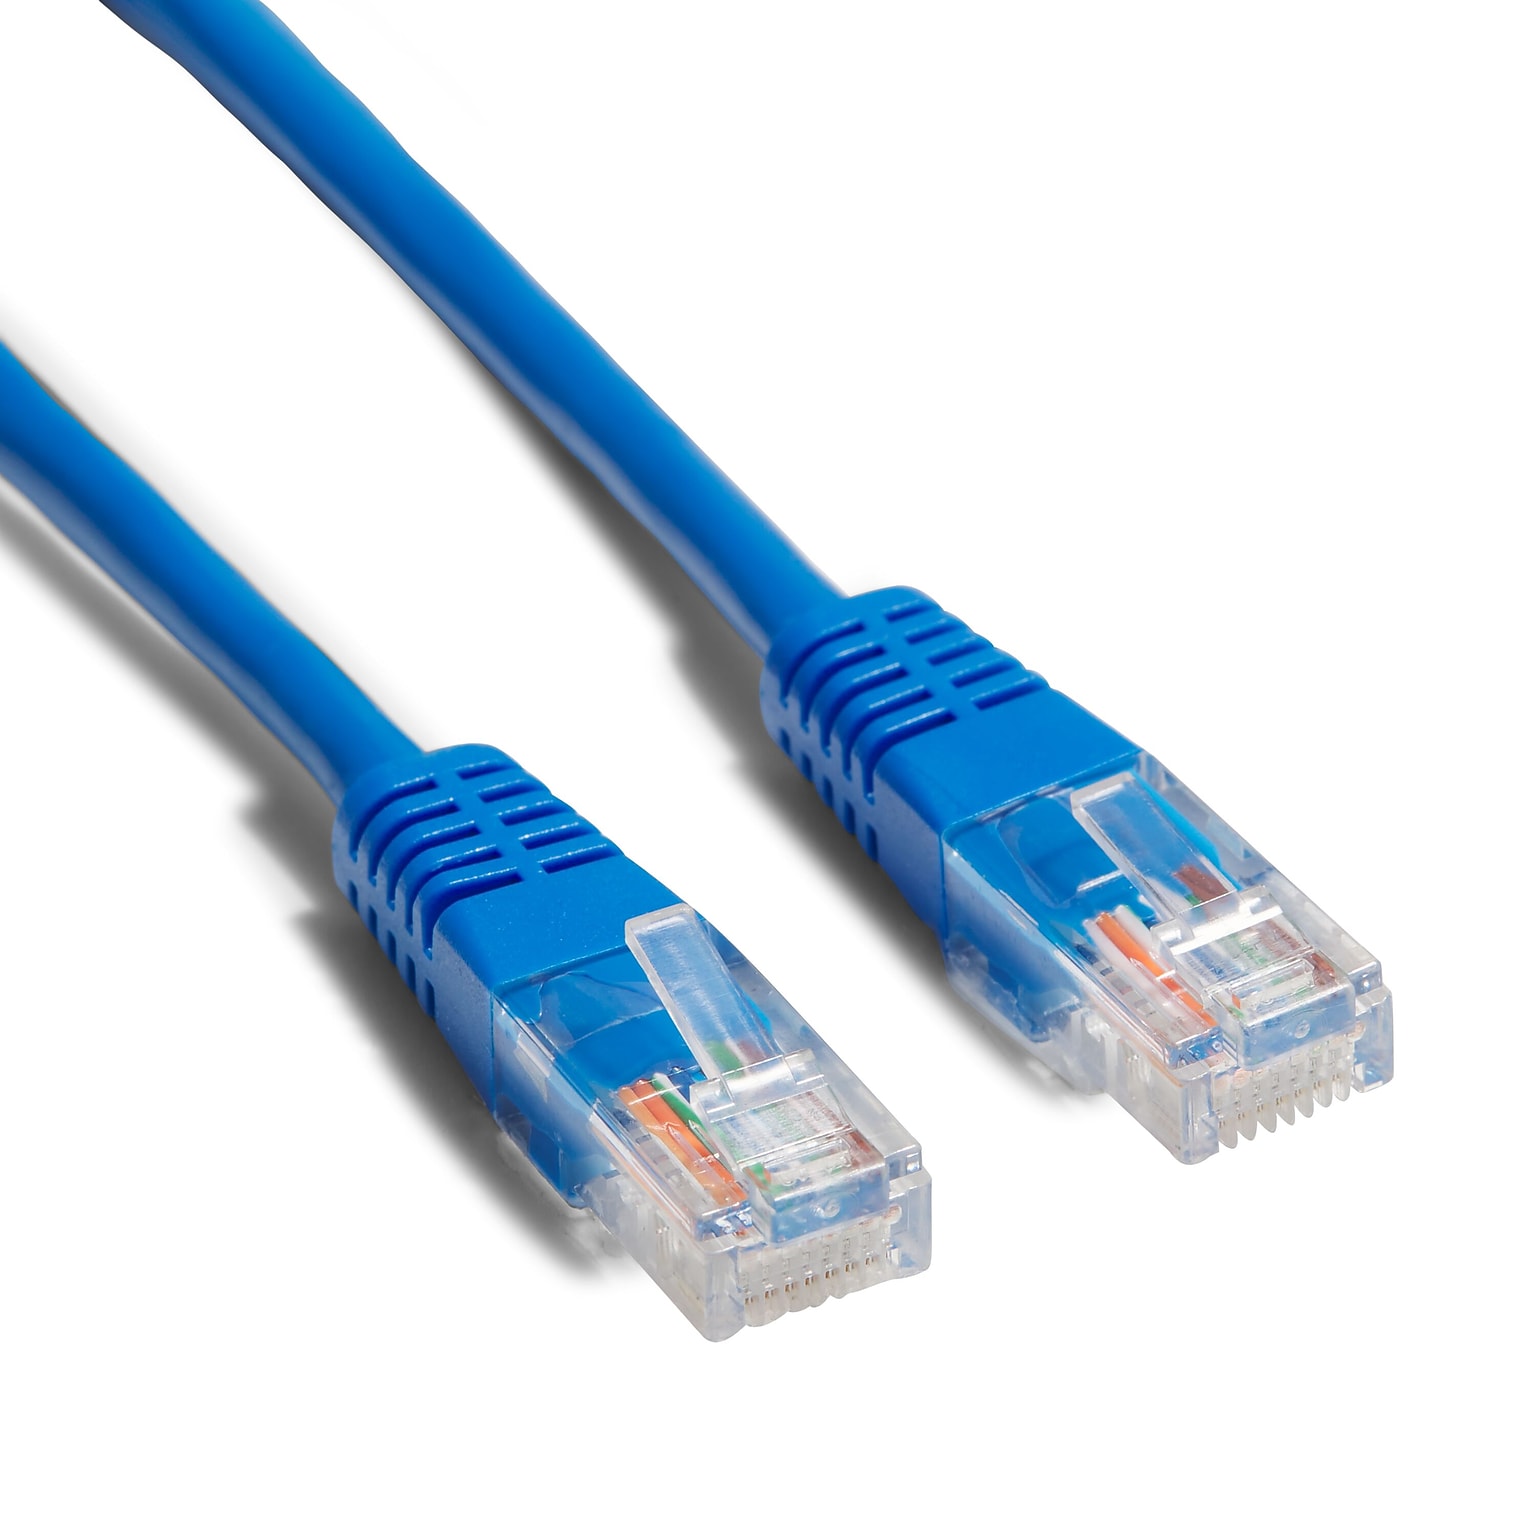 NXT Technologies™ NX29885 7 CAT-5e Cable, Blue